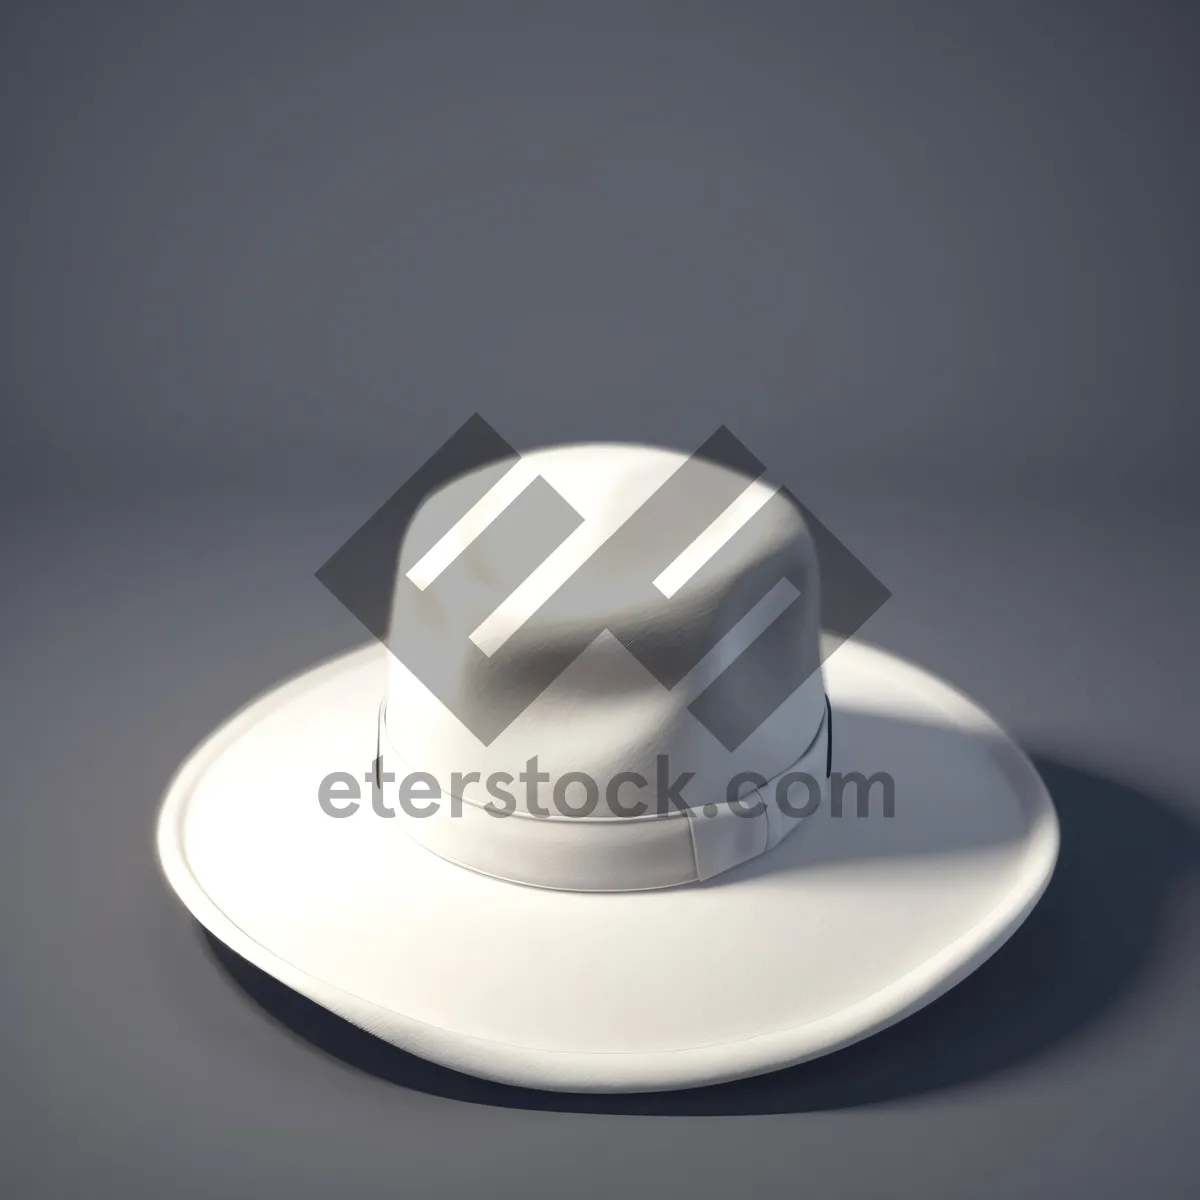 Picture of Coffee Cup Saucer: Aromatic Morning Brew in Porcelain